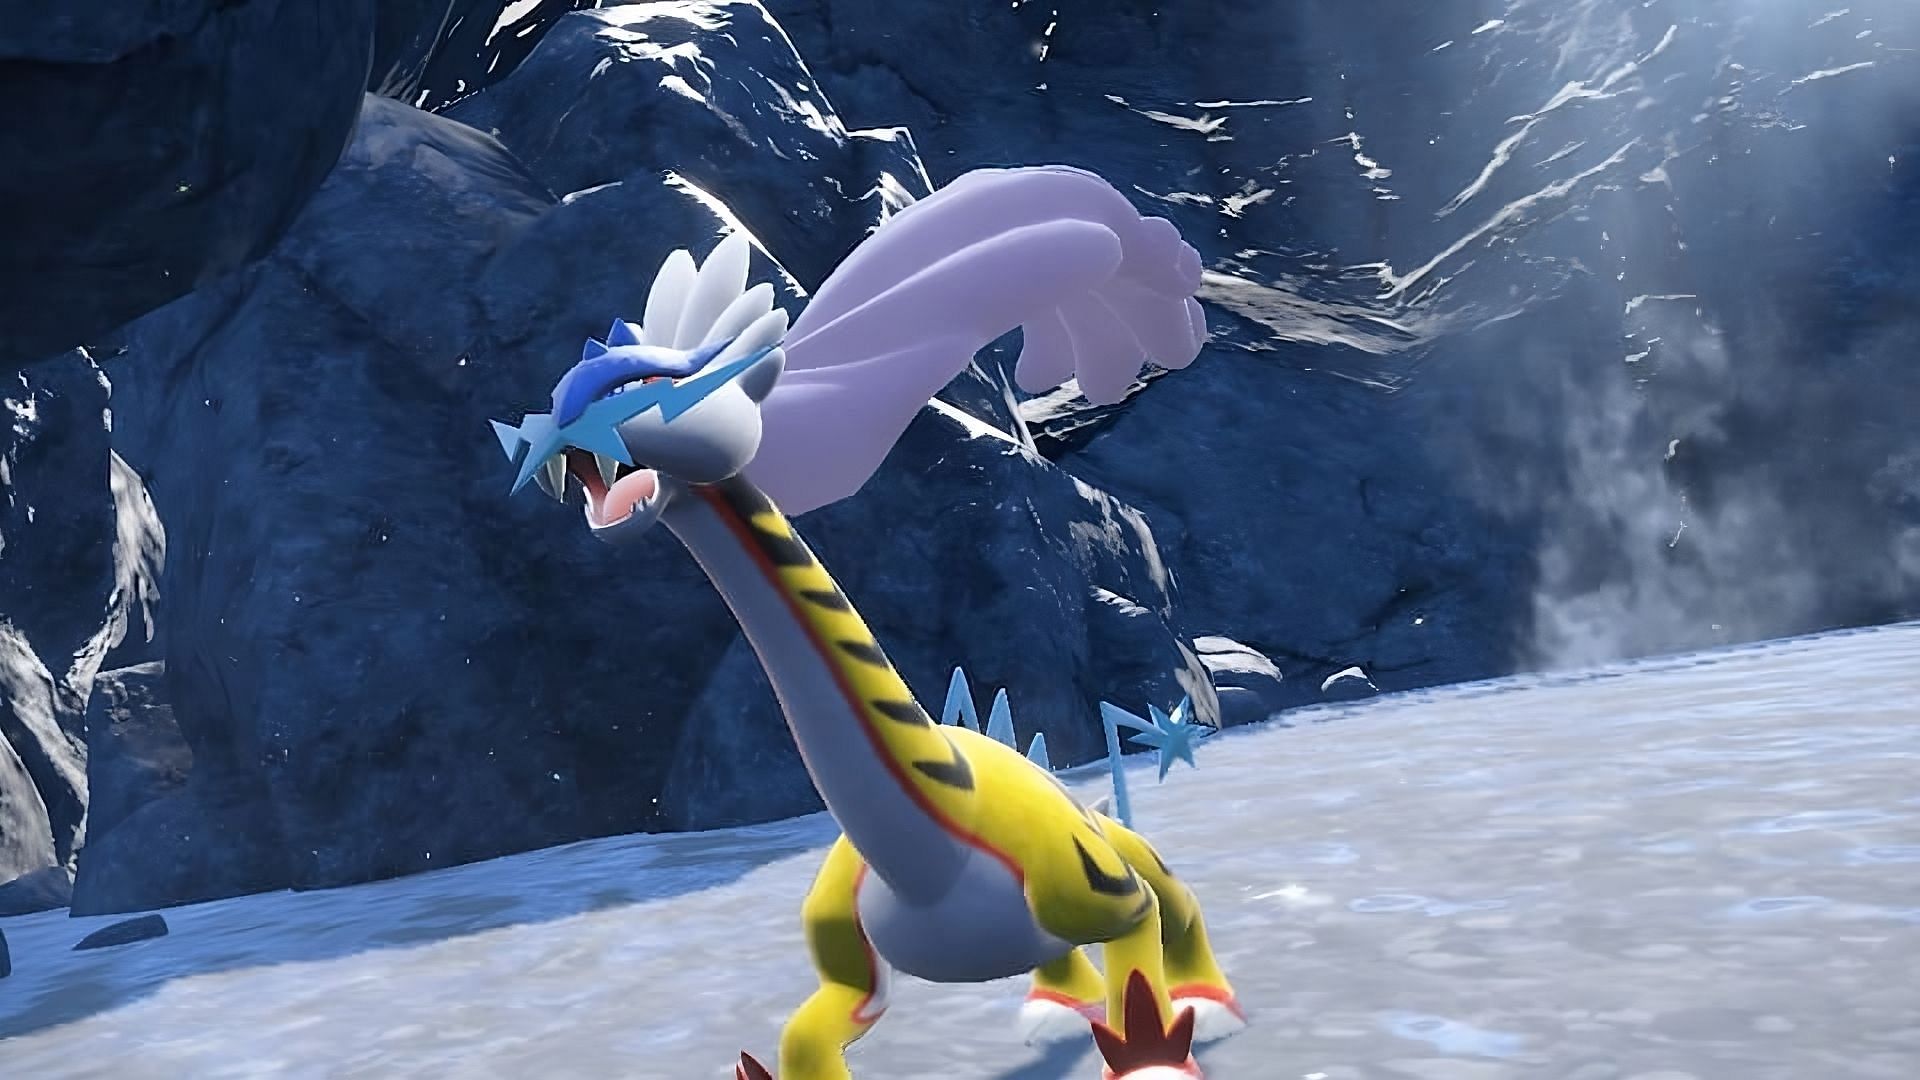 Raging Bolt&#039;s appearance in Pokemon Scarlet and Violet&#039;s trailer was controversial, to say the least (Image via Game Freak)